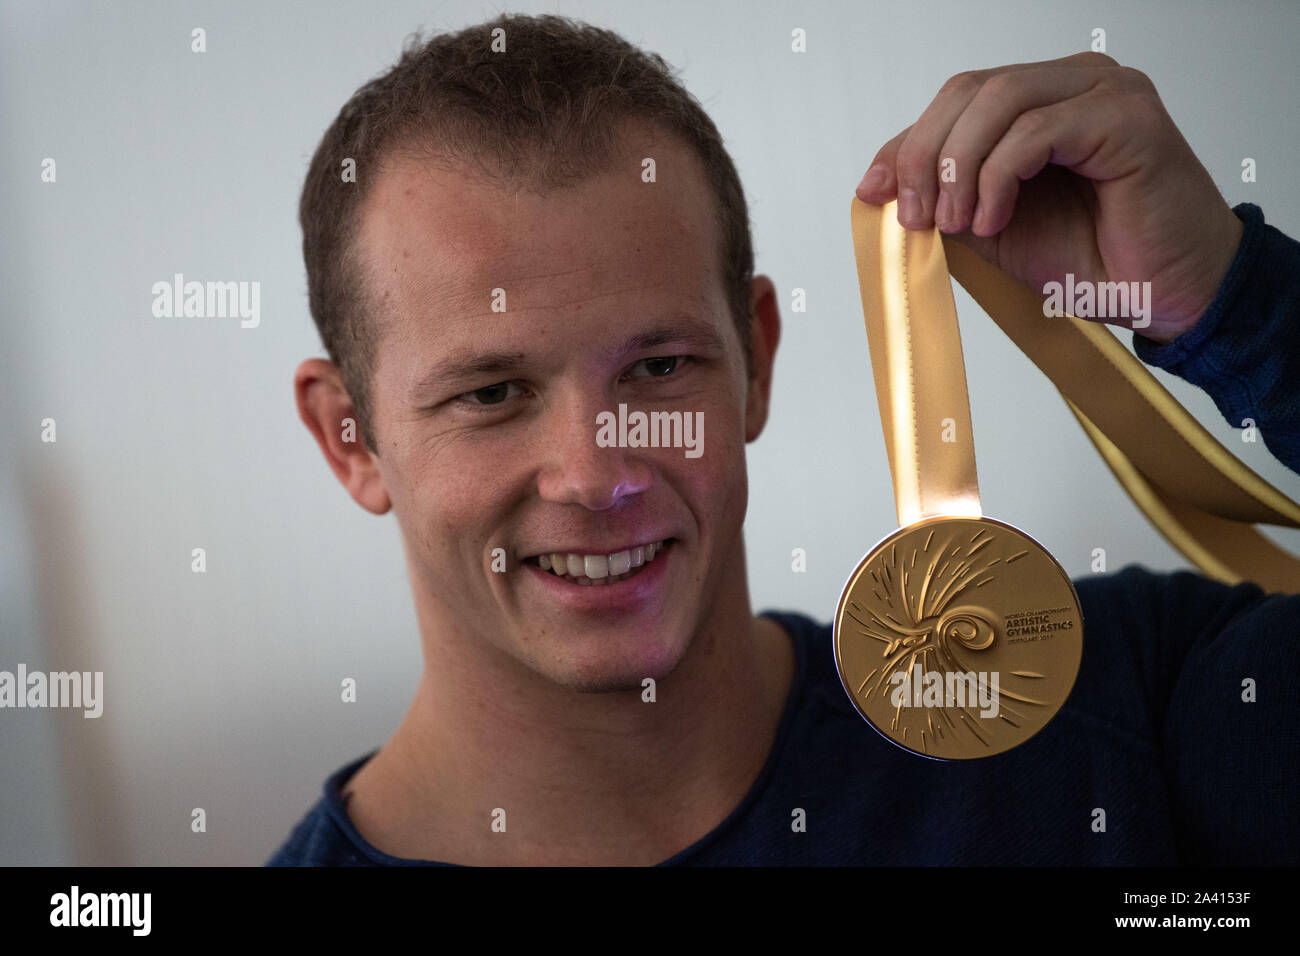 11 October 2019, Baden-Wuerttemberg, Stuttgart: Fabian Hambüchen with the gold medal of the Turn - WM 2019, which shines. In Weinstadt near Stuttgart the glowing medals for the Gymnastics World Championships are finished. Hambüchen signed the medal of this year's high bar world champion on the inside and assembled it independently. Photo: Tom Weller/dpa Stock Photo